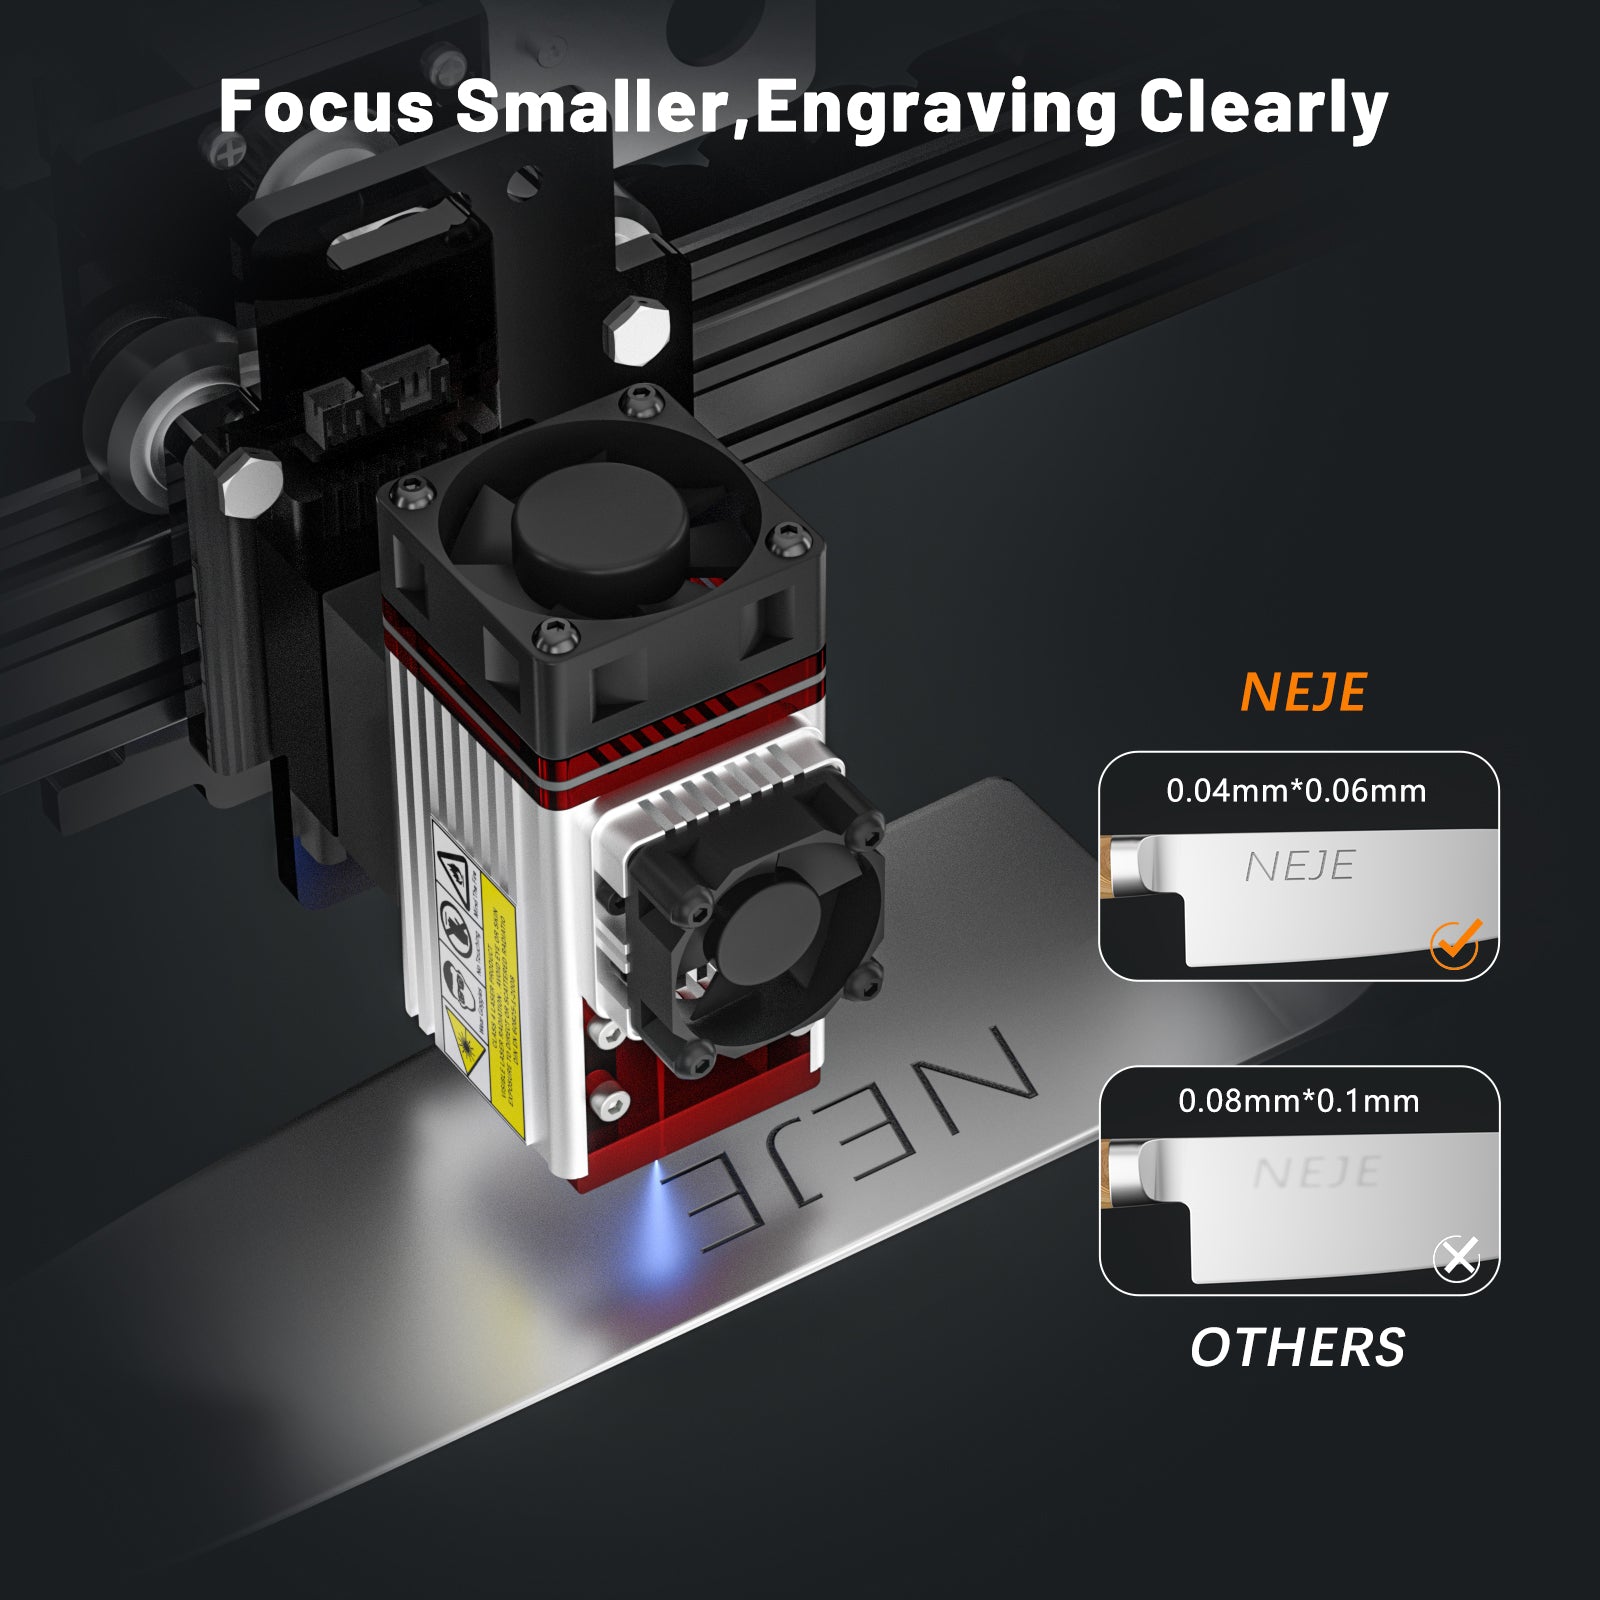 NEJE A40640 Zoom Laser Module for Carving and Cutting - 2 x beam - 12W Output - Widely Applied